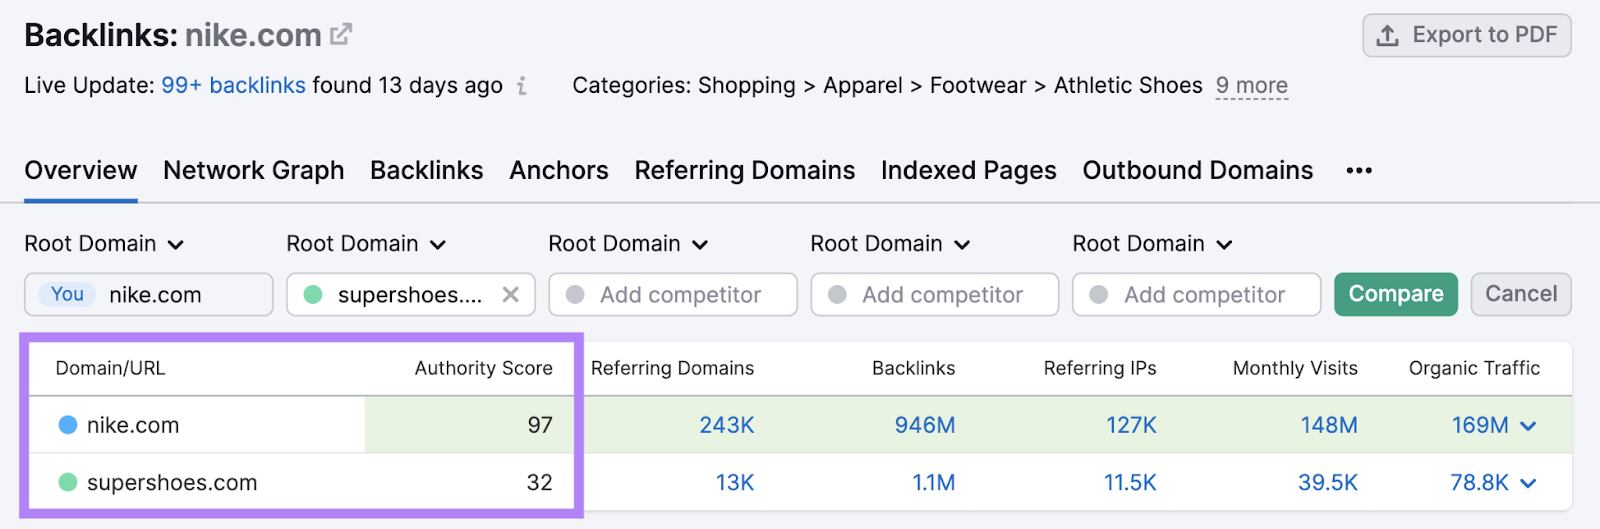 Authority Score shown for nike.com and supershoes.com successful  Backlink Analytics tool